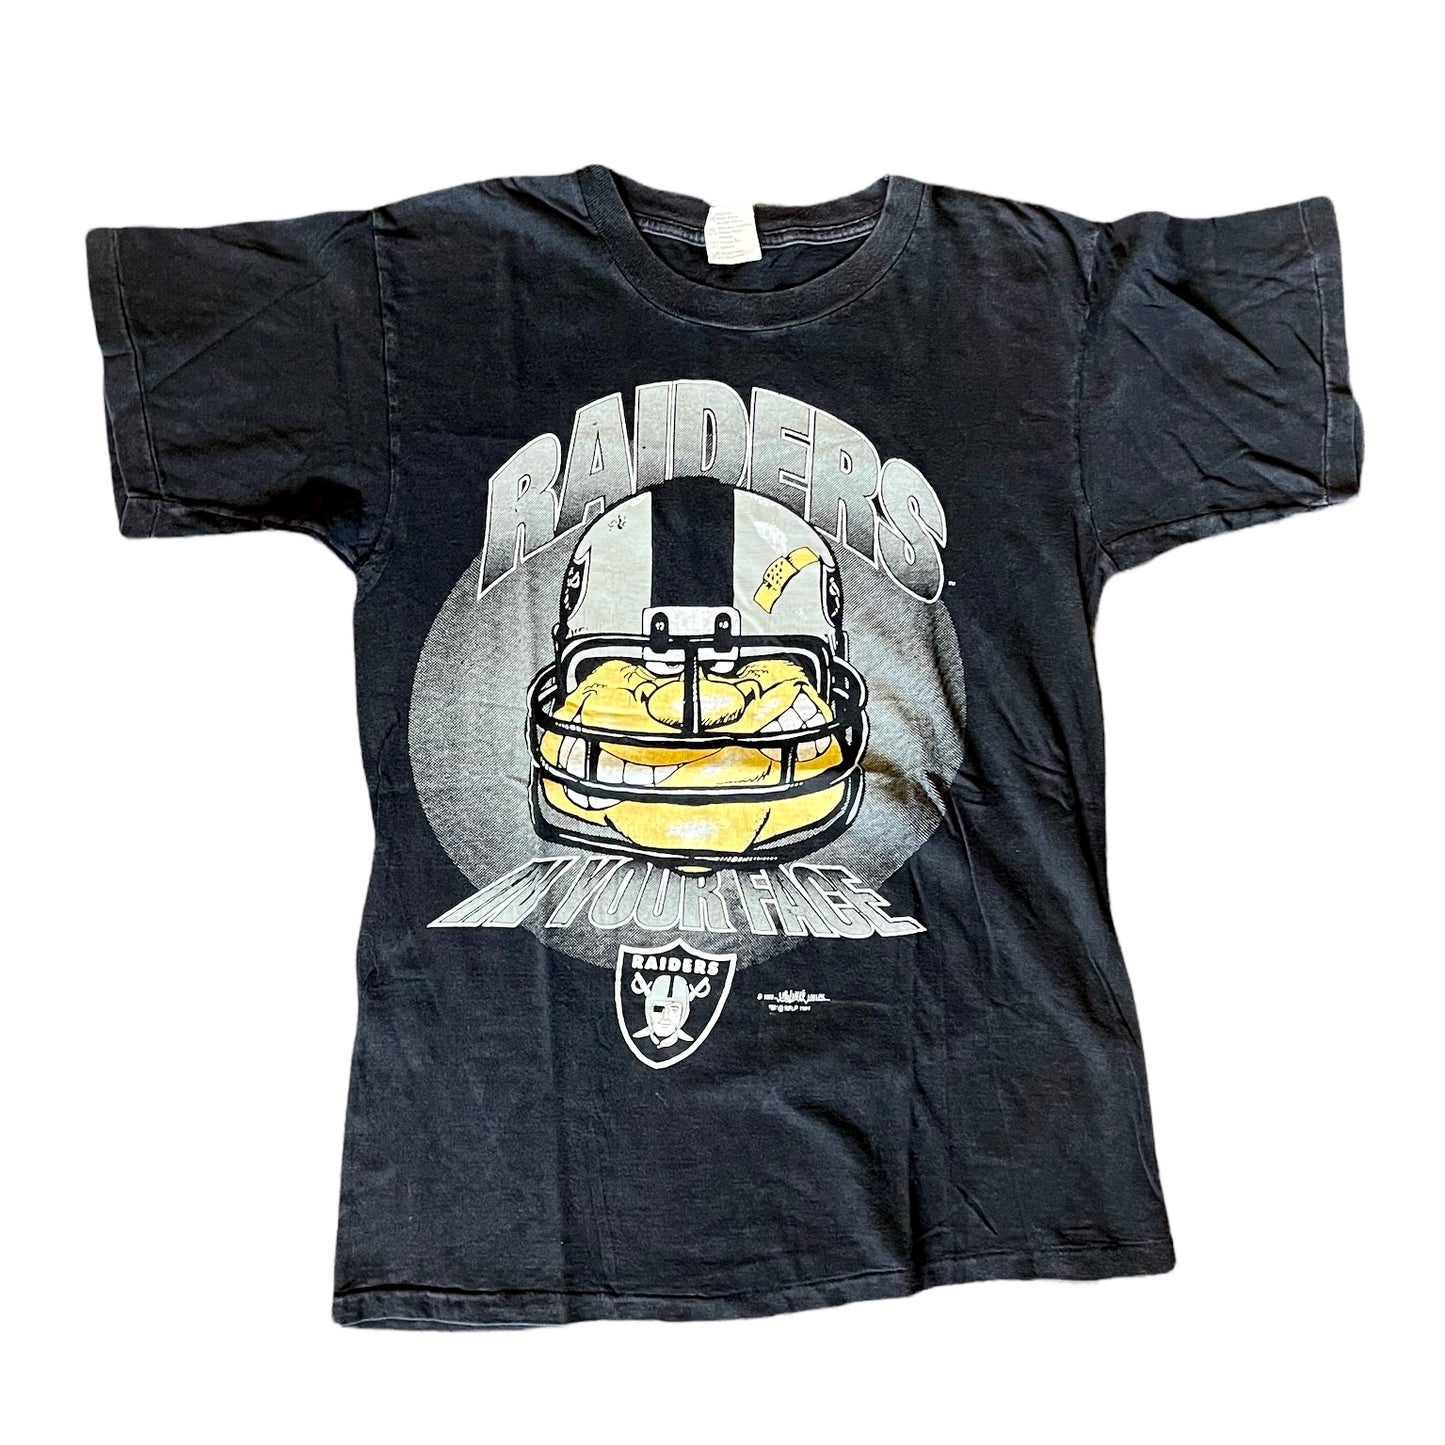 1994 Raiders In Your Face Shirt